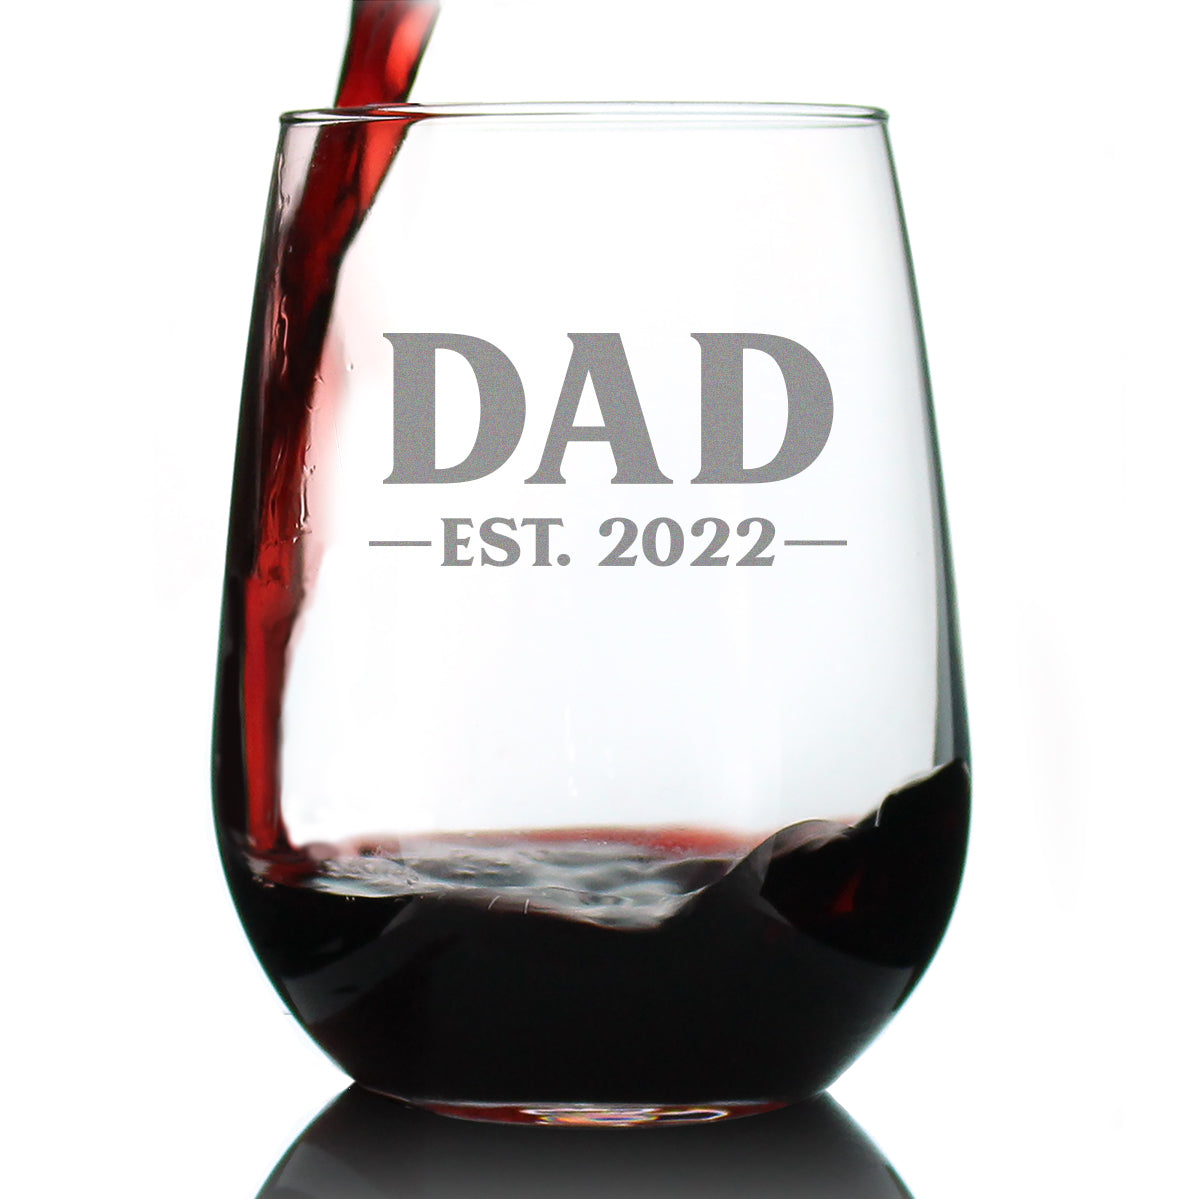 The Best Red Wine Glasses in 2022